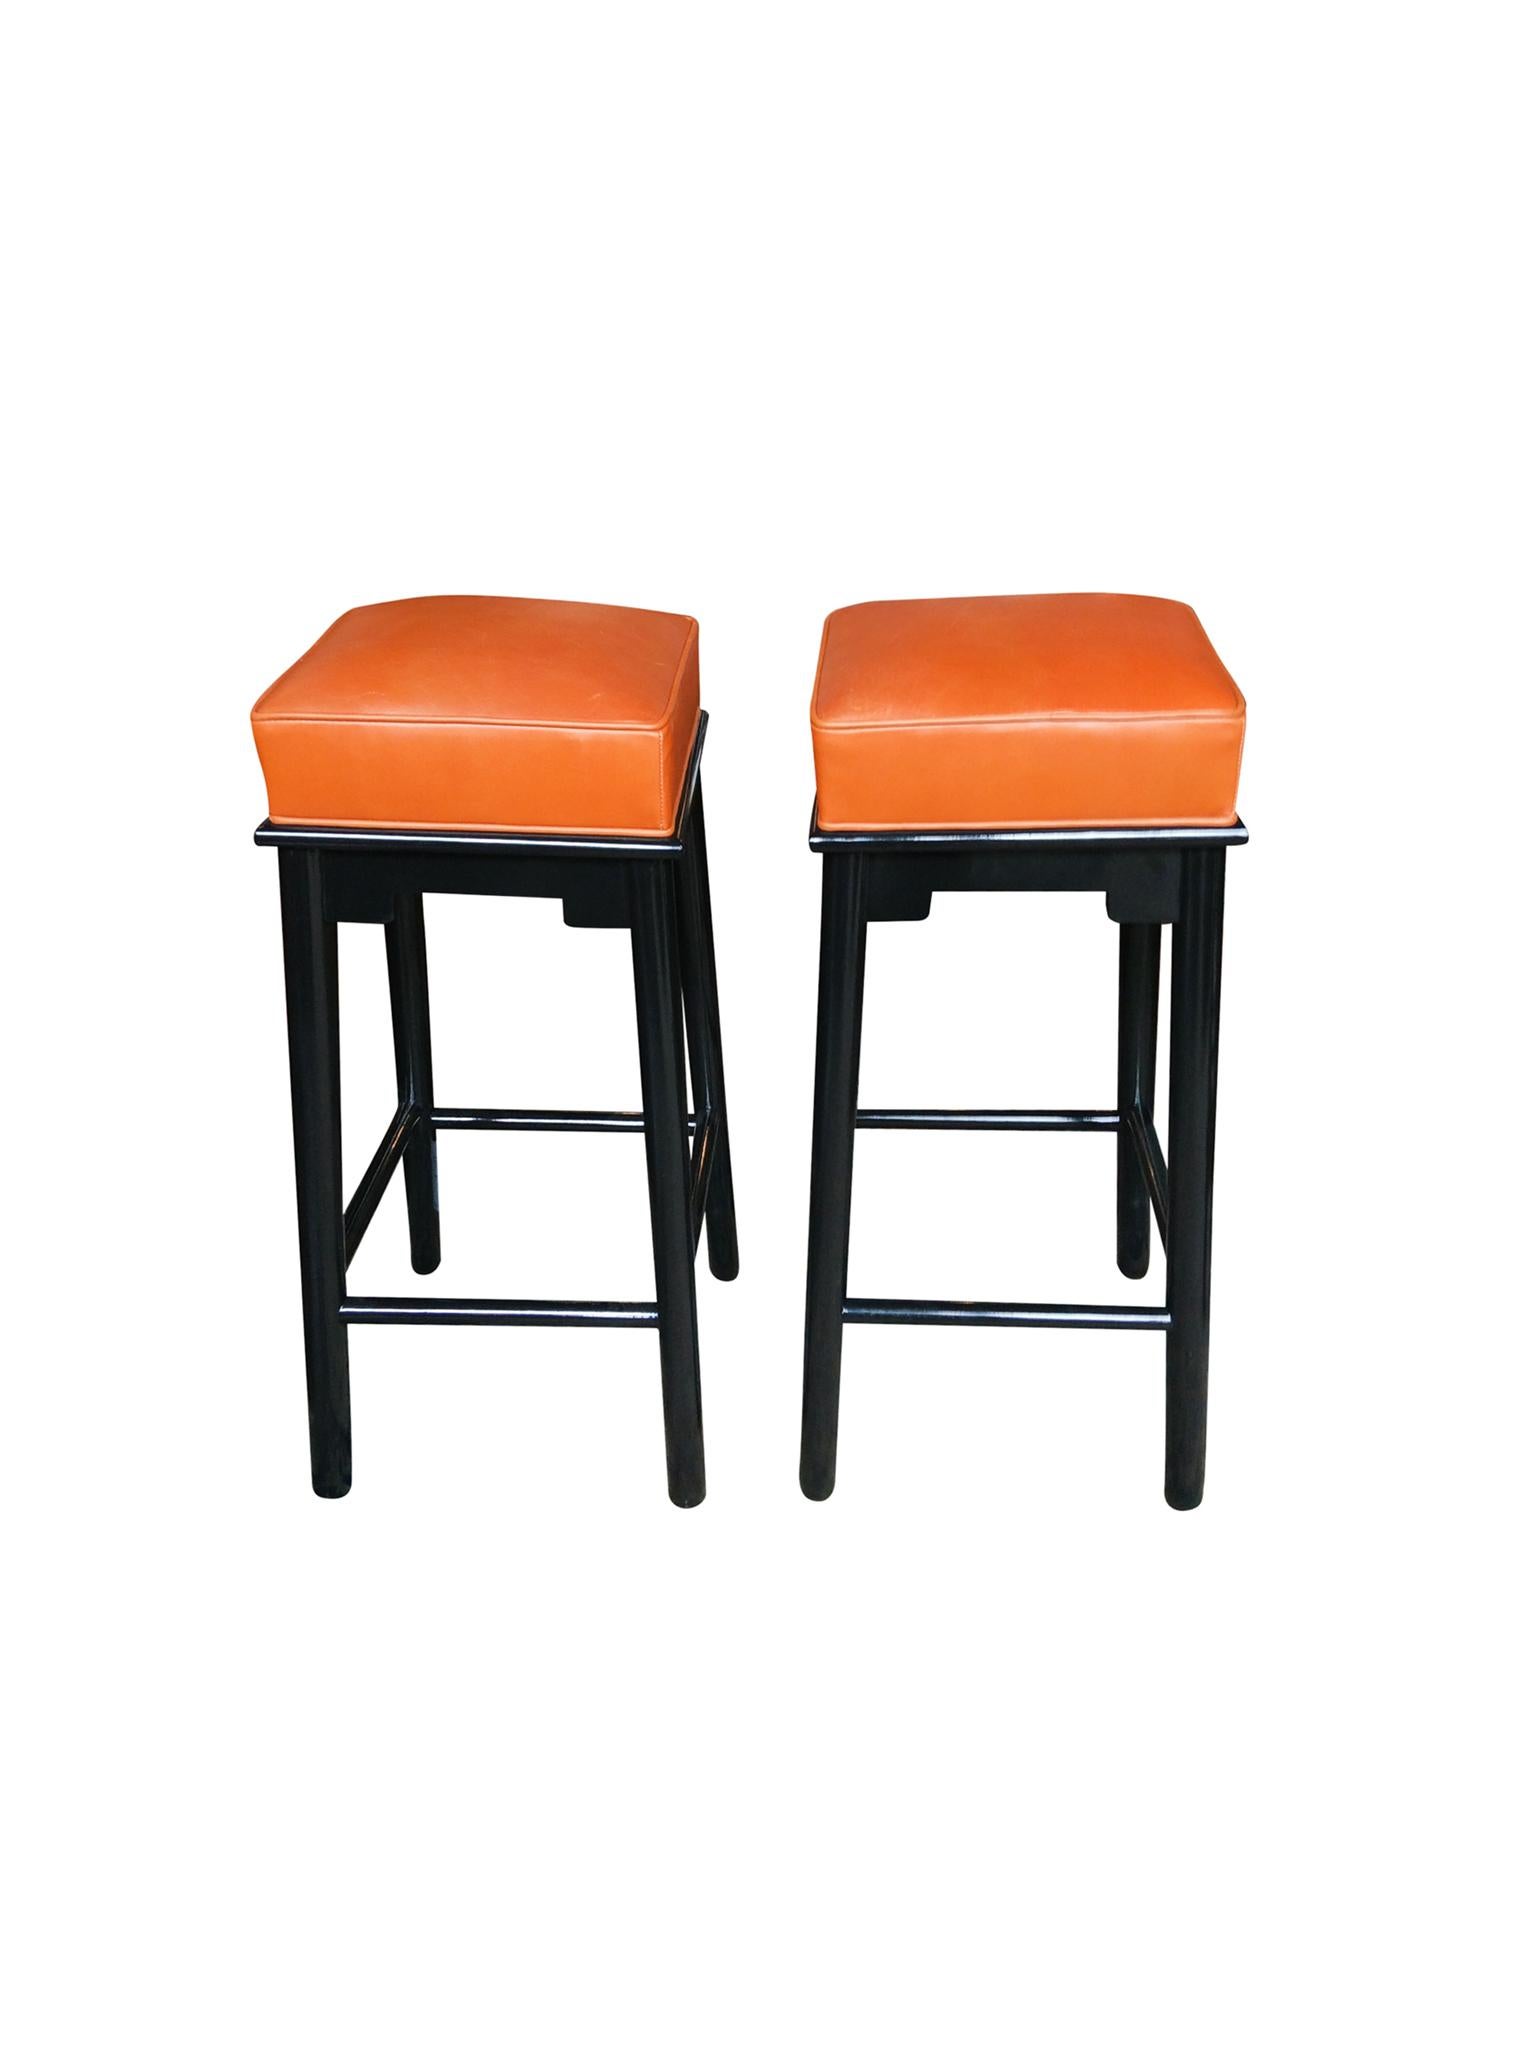 An outstanding pair of bar stools with new finish and upholstery. The stools' design is in the eccentric style of James Mont, who mixed various styles in his furniture. This pair is newly re-ecushioned and reupholstered with a vintage caramel